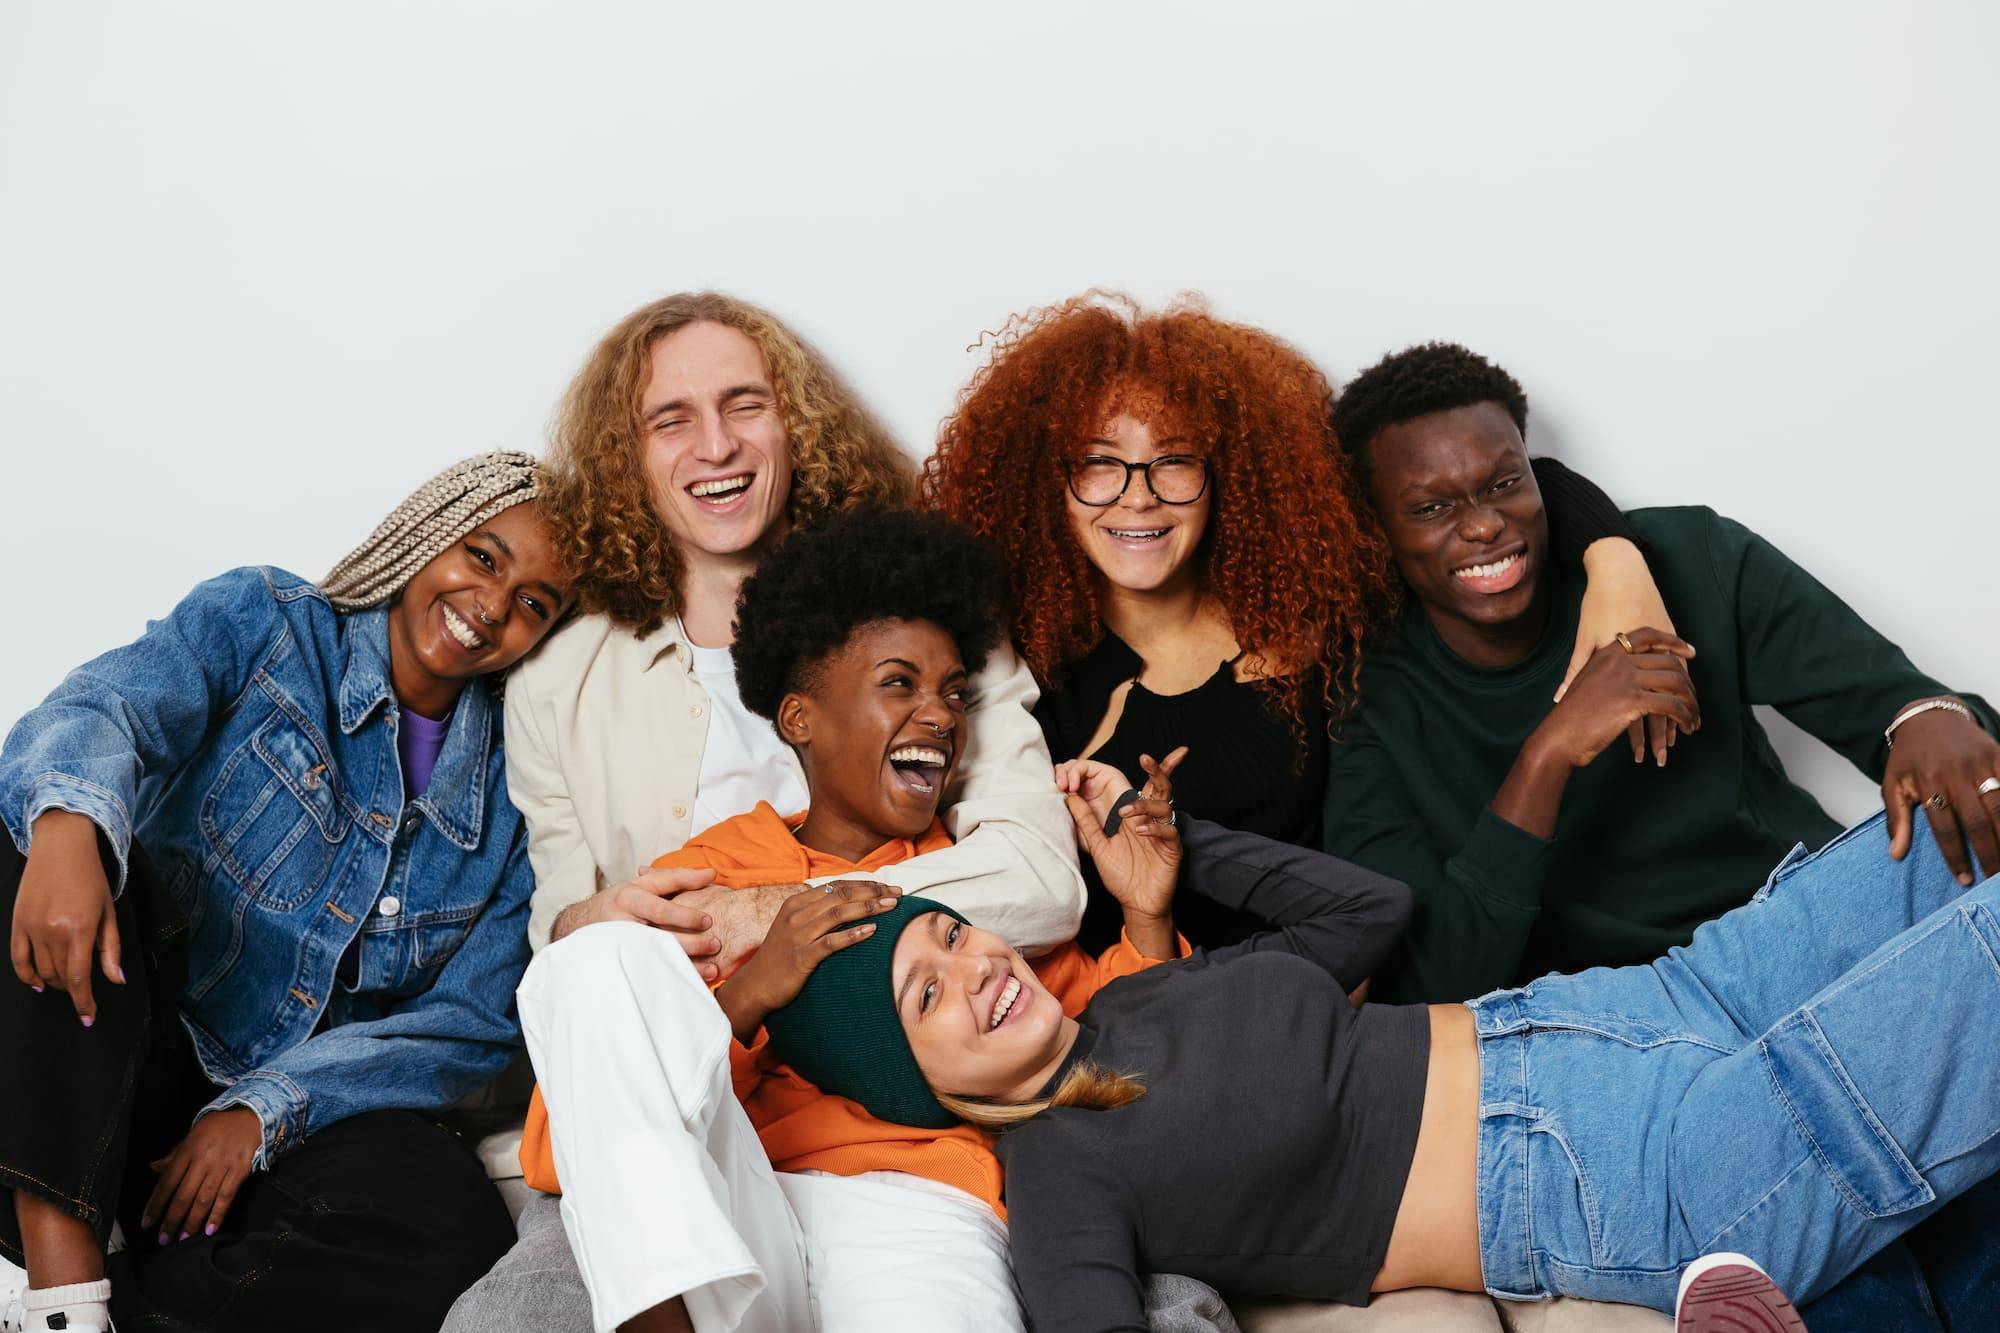 Group of cheerful teenage friends in stylish clothes embracing and looking at camera while sitting on floor in studio